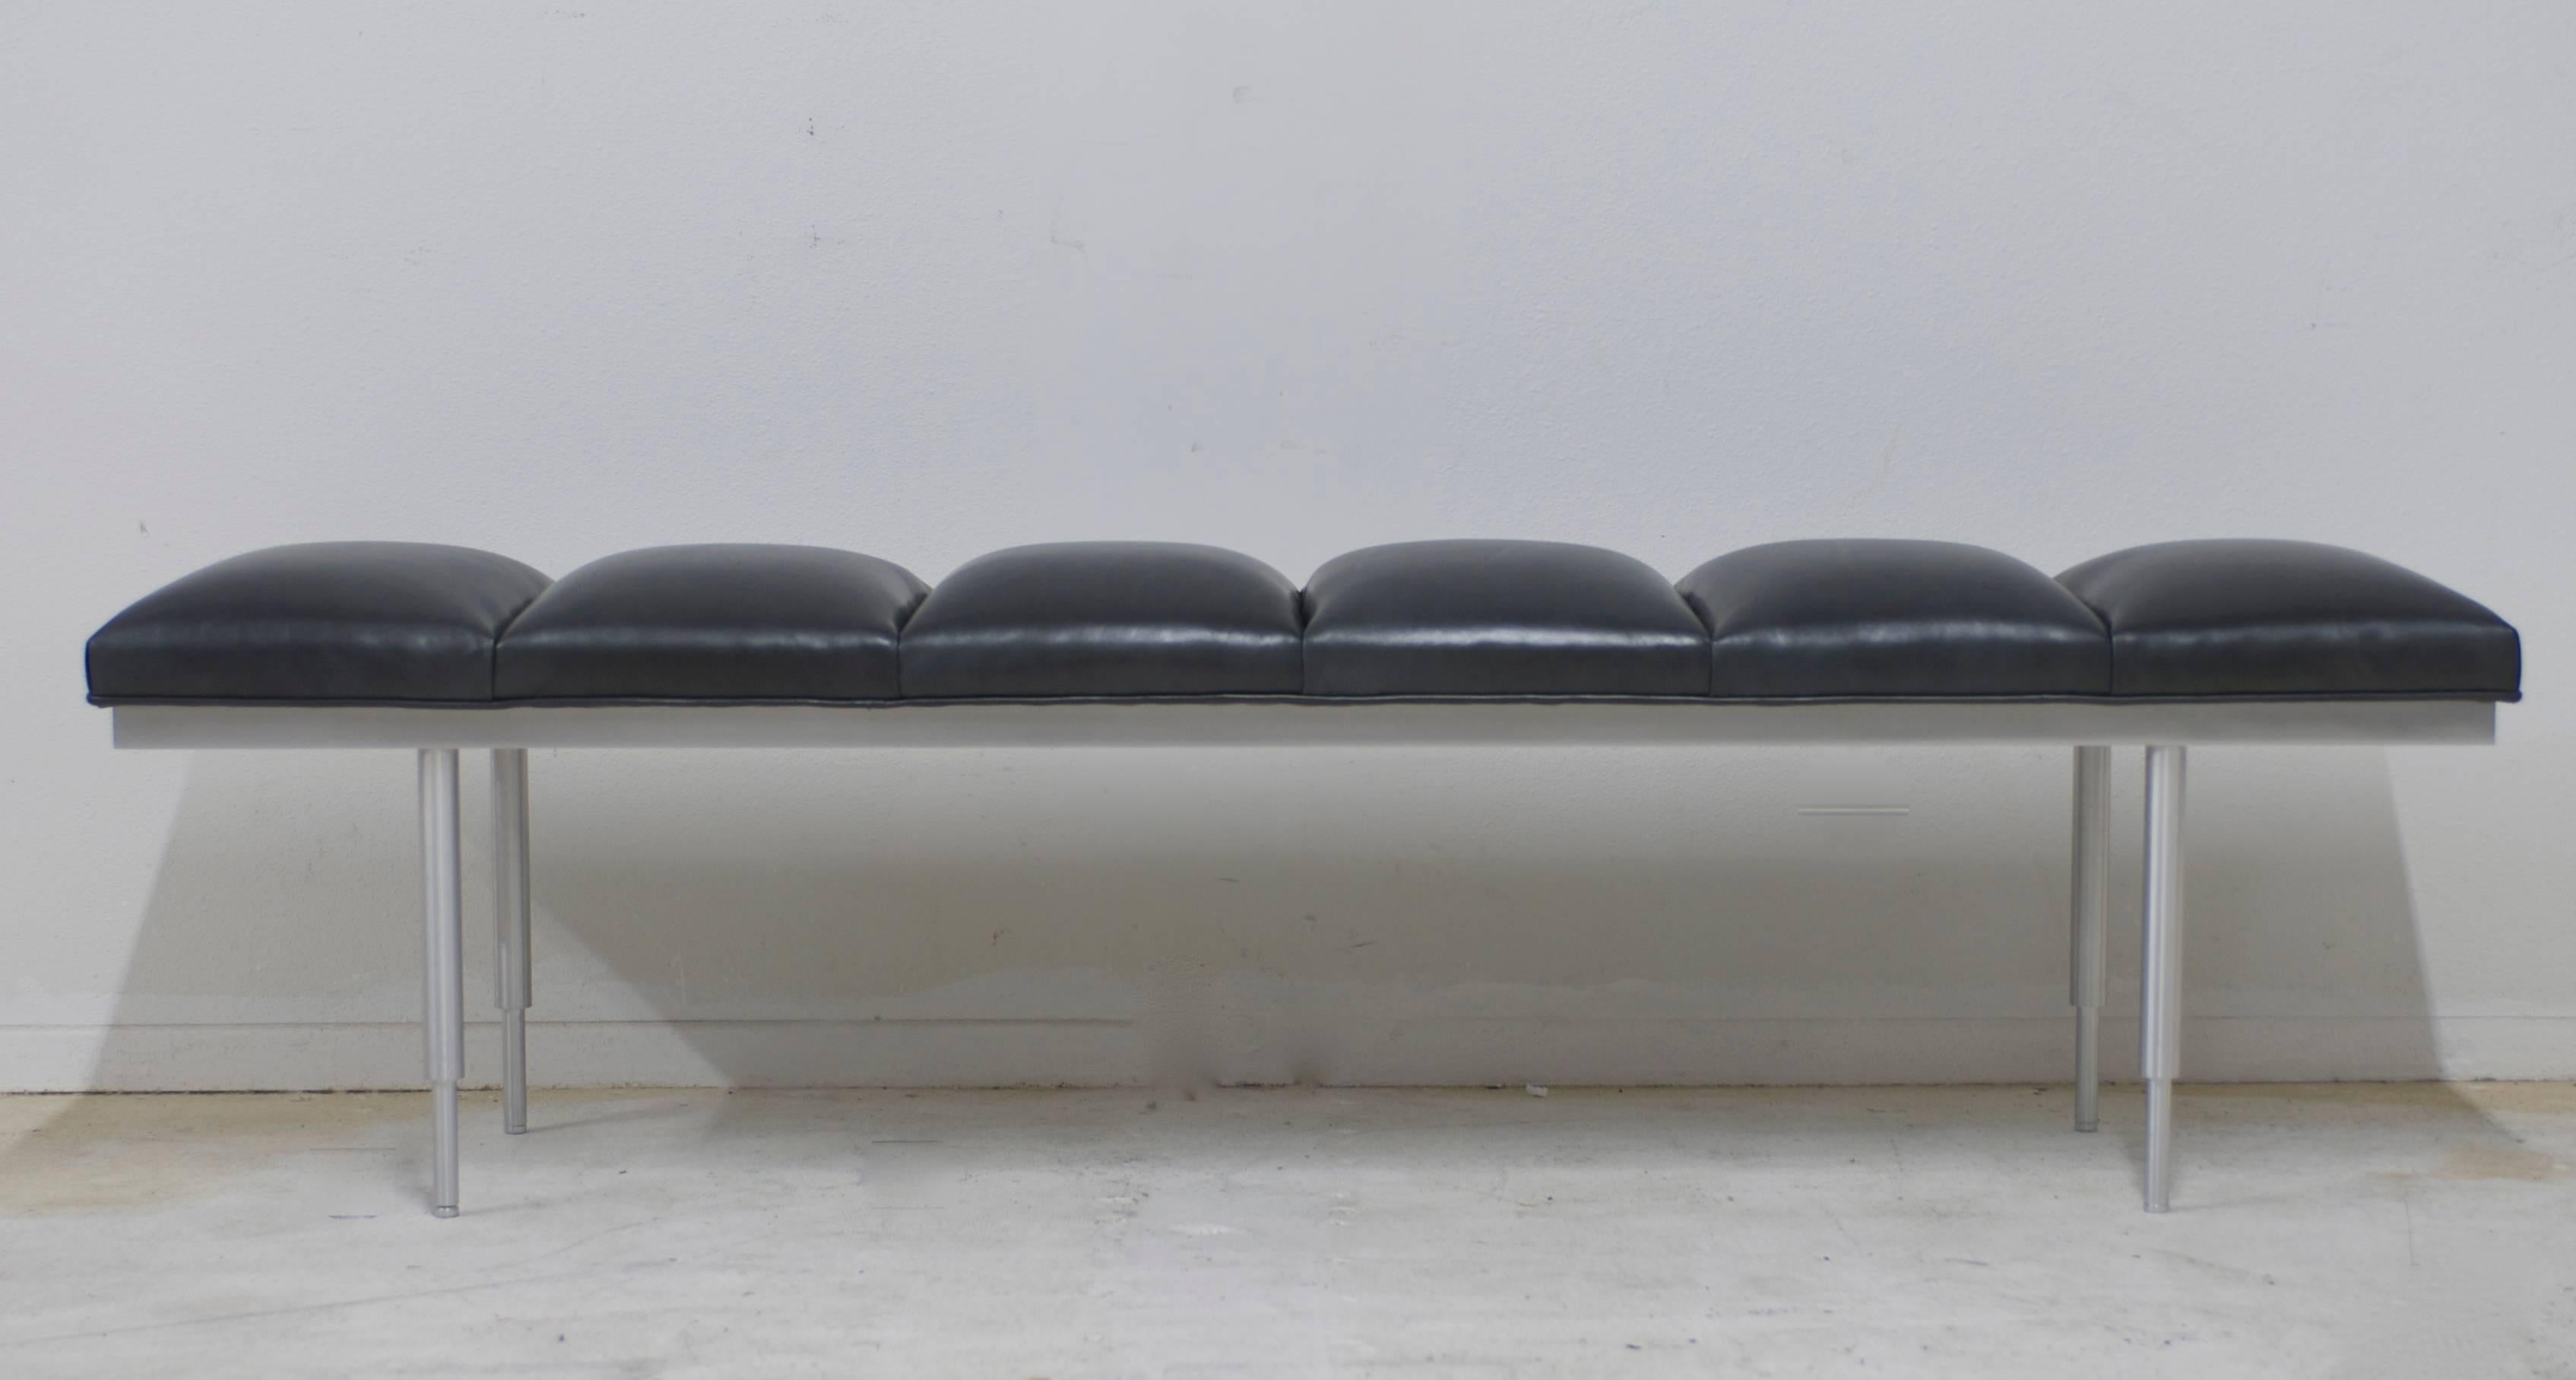 A  brushed aluminum, 1970s era bench that has been reupholstered in a black charcoal leather with a slight metallic sheen to it. The leather is channel tufted for a sleek Classic modern look. The legs of the bench have two placement options they can